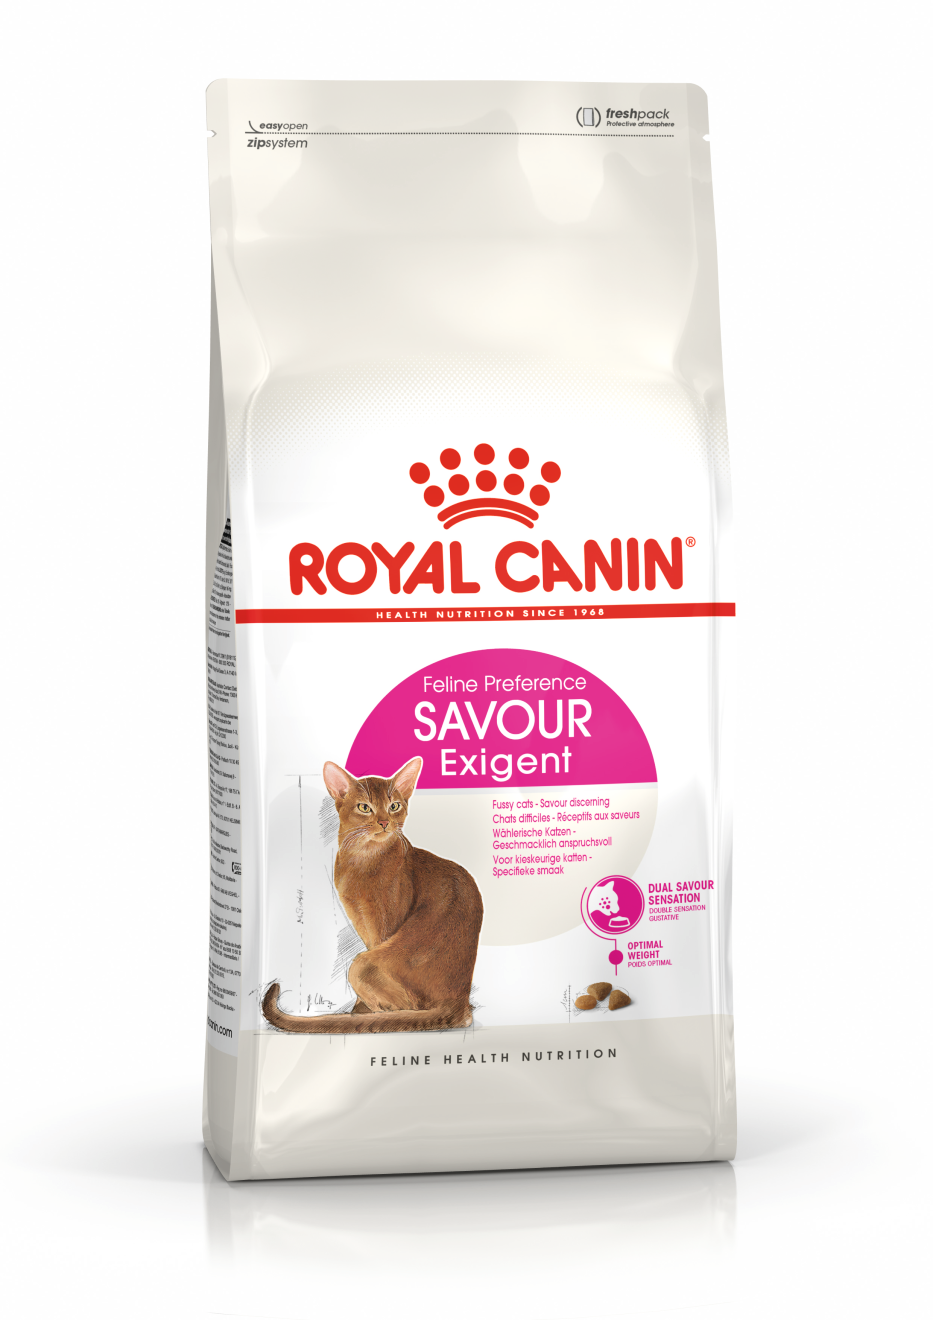 royal canin exigent aromatic